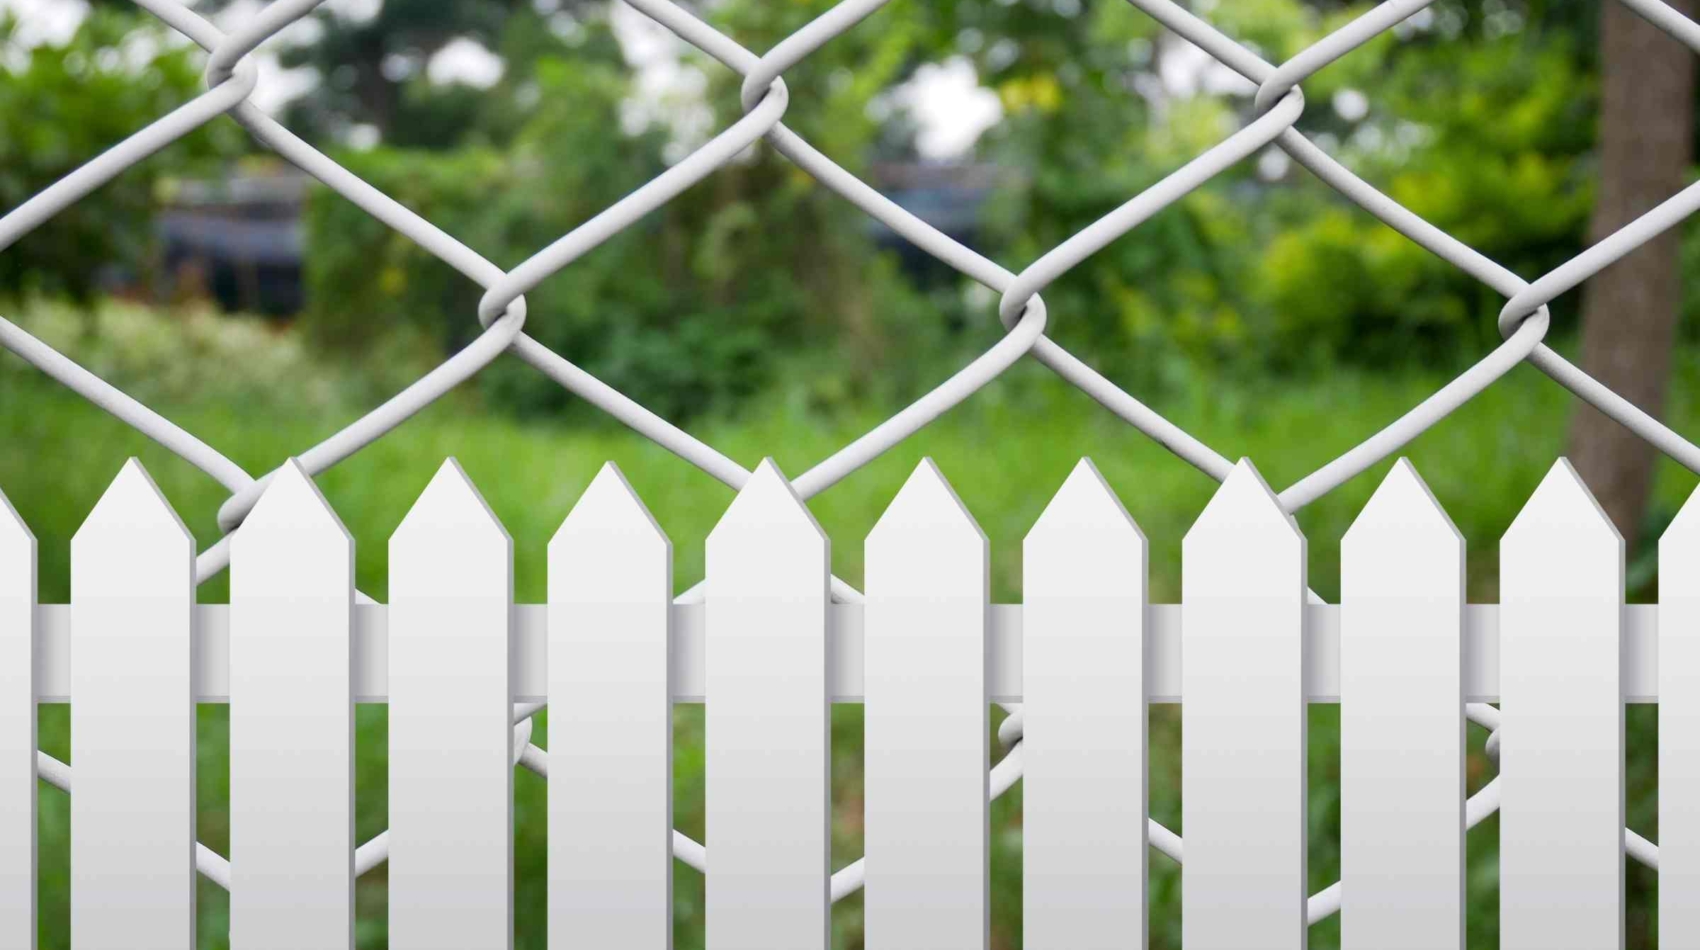 Farm Fencing - Here Are kinds of Farm Fences You Need to keep in mind For Your Farm